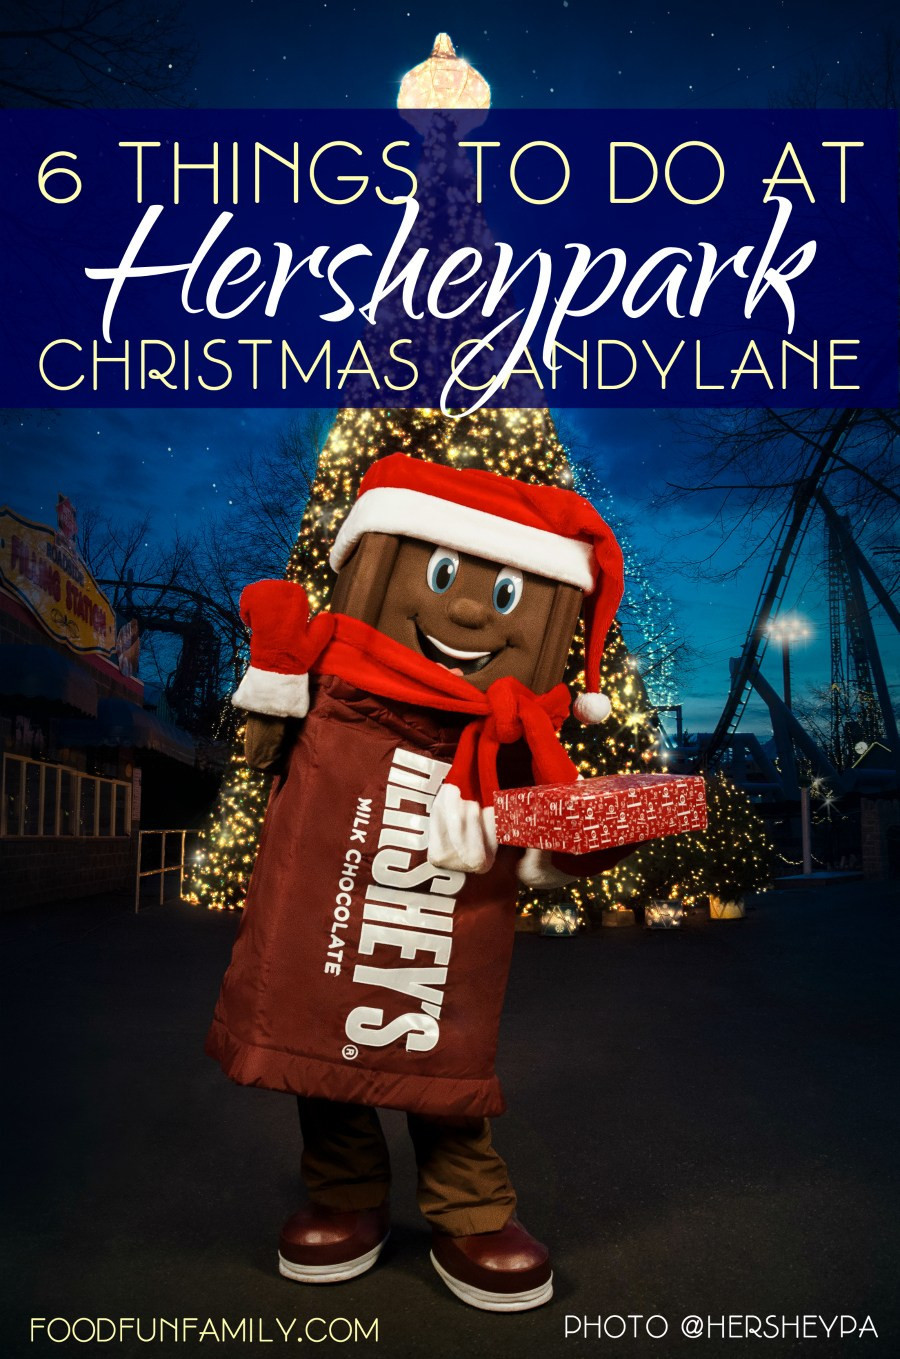 Christmas Candy Lane Hours
 21 Best Christmas Candy Lane Hours Most Popular Ideas of